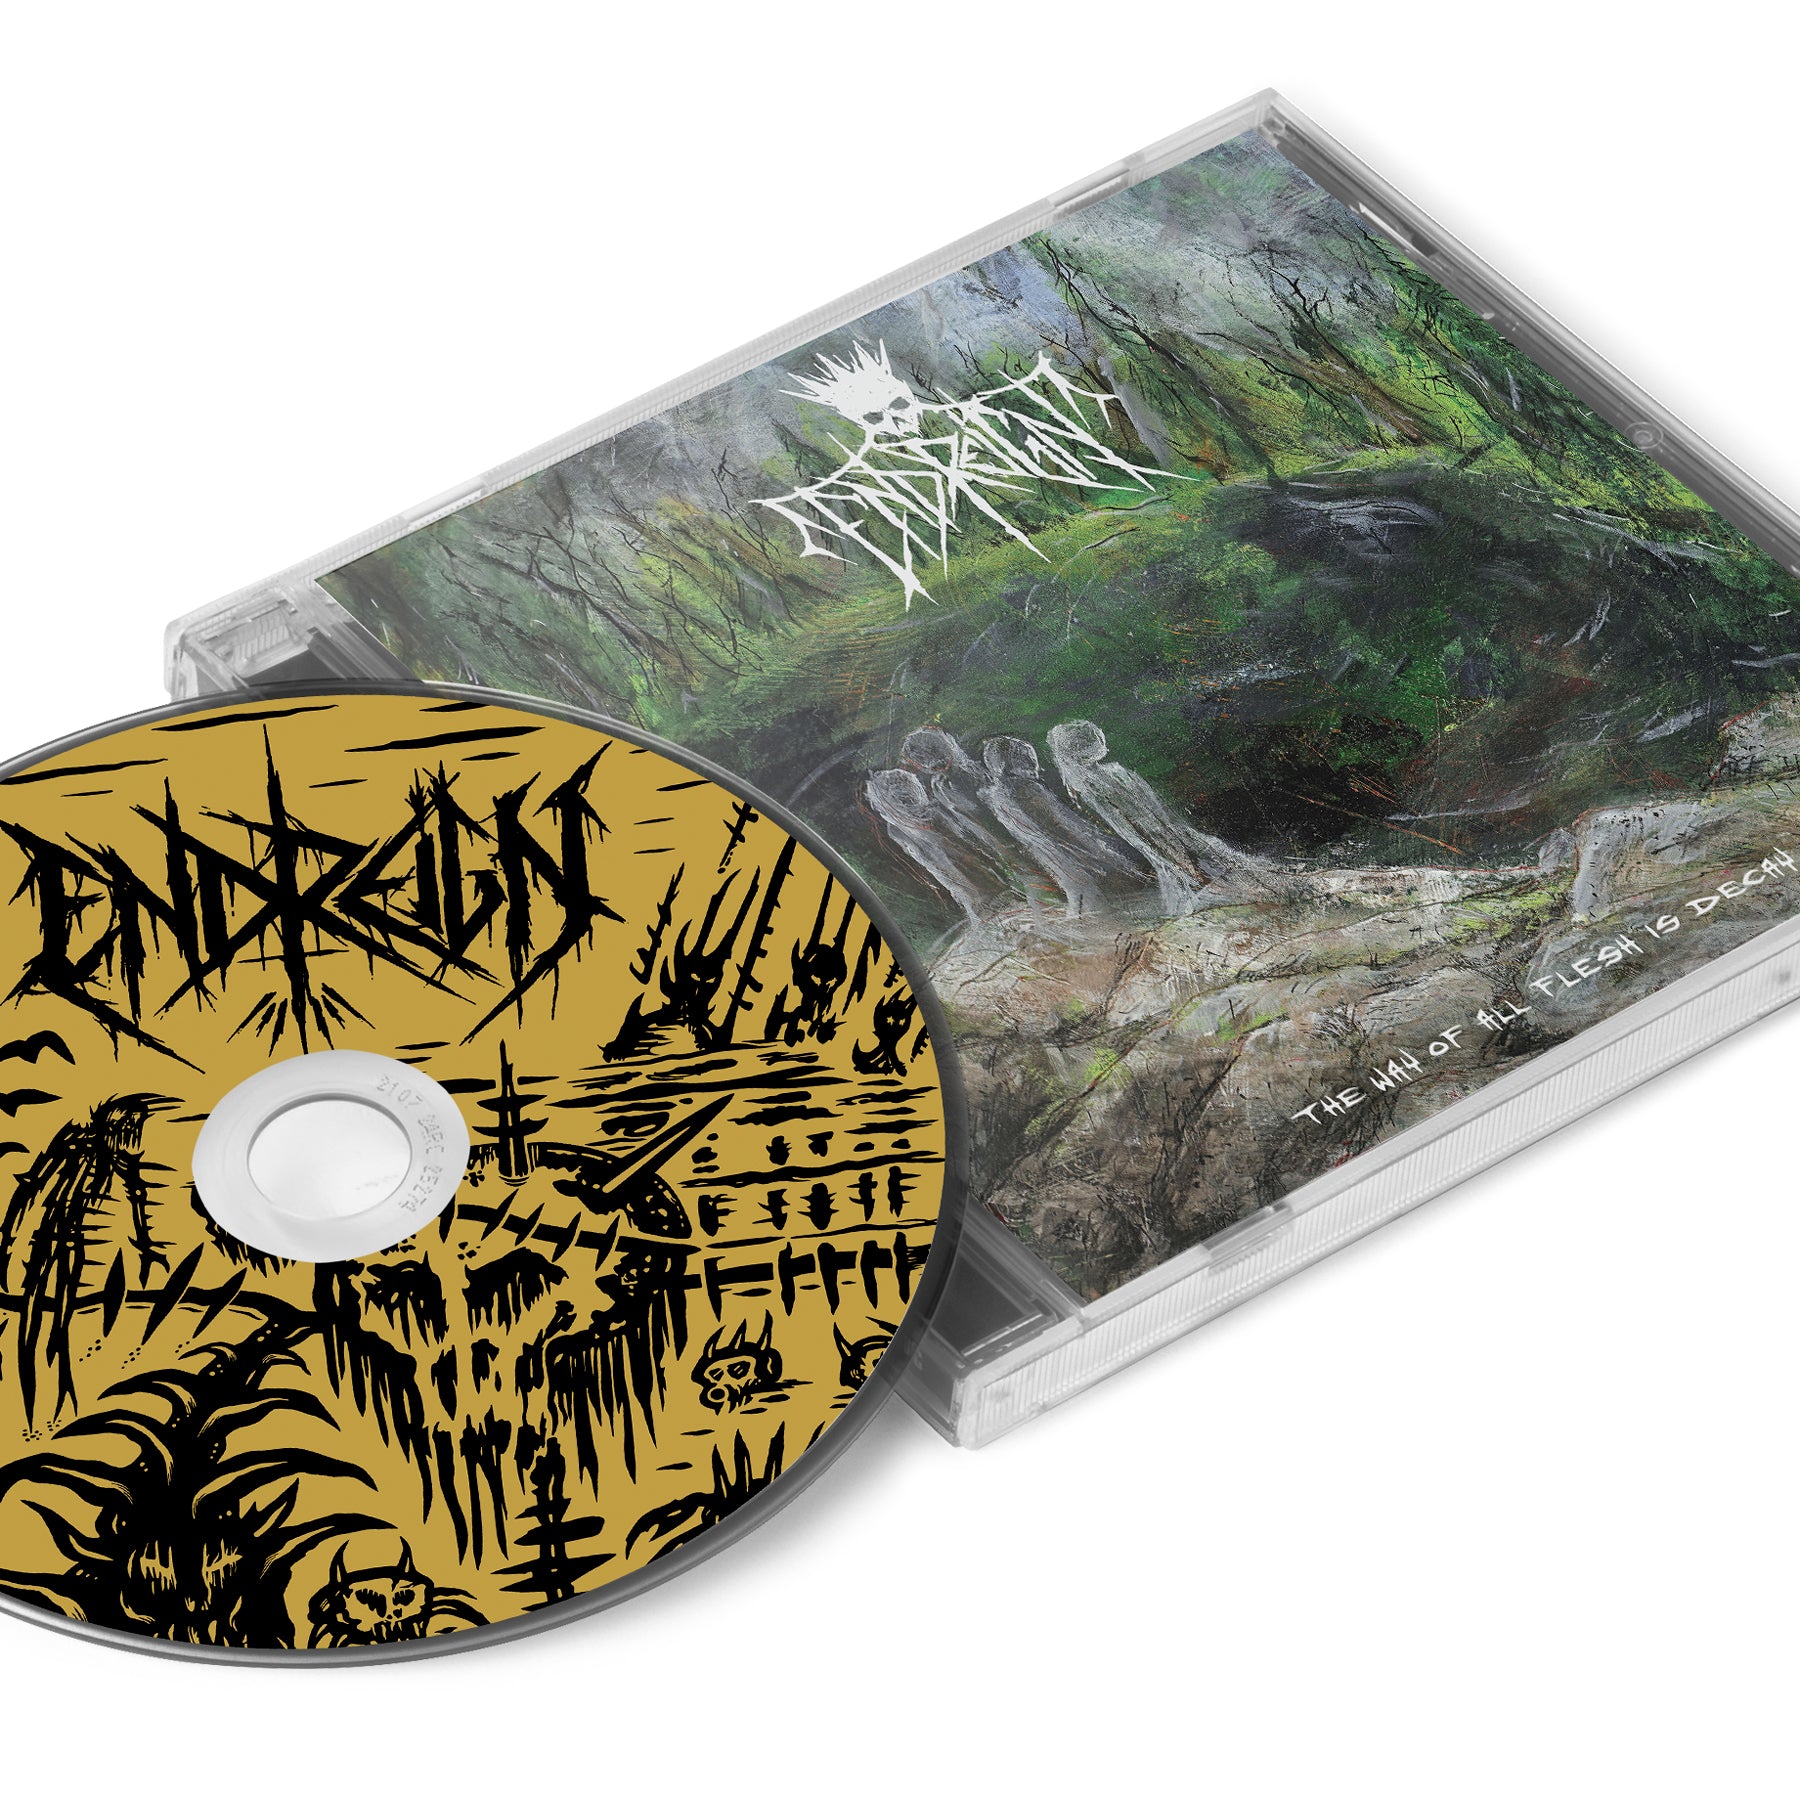 End Reign "The Way Of All Flesh Is Decay" CD